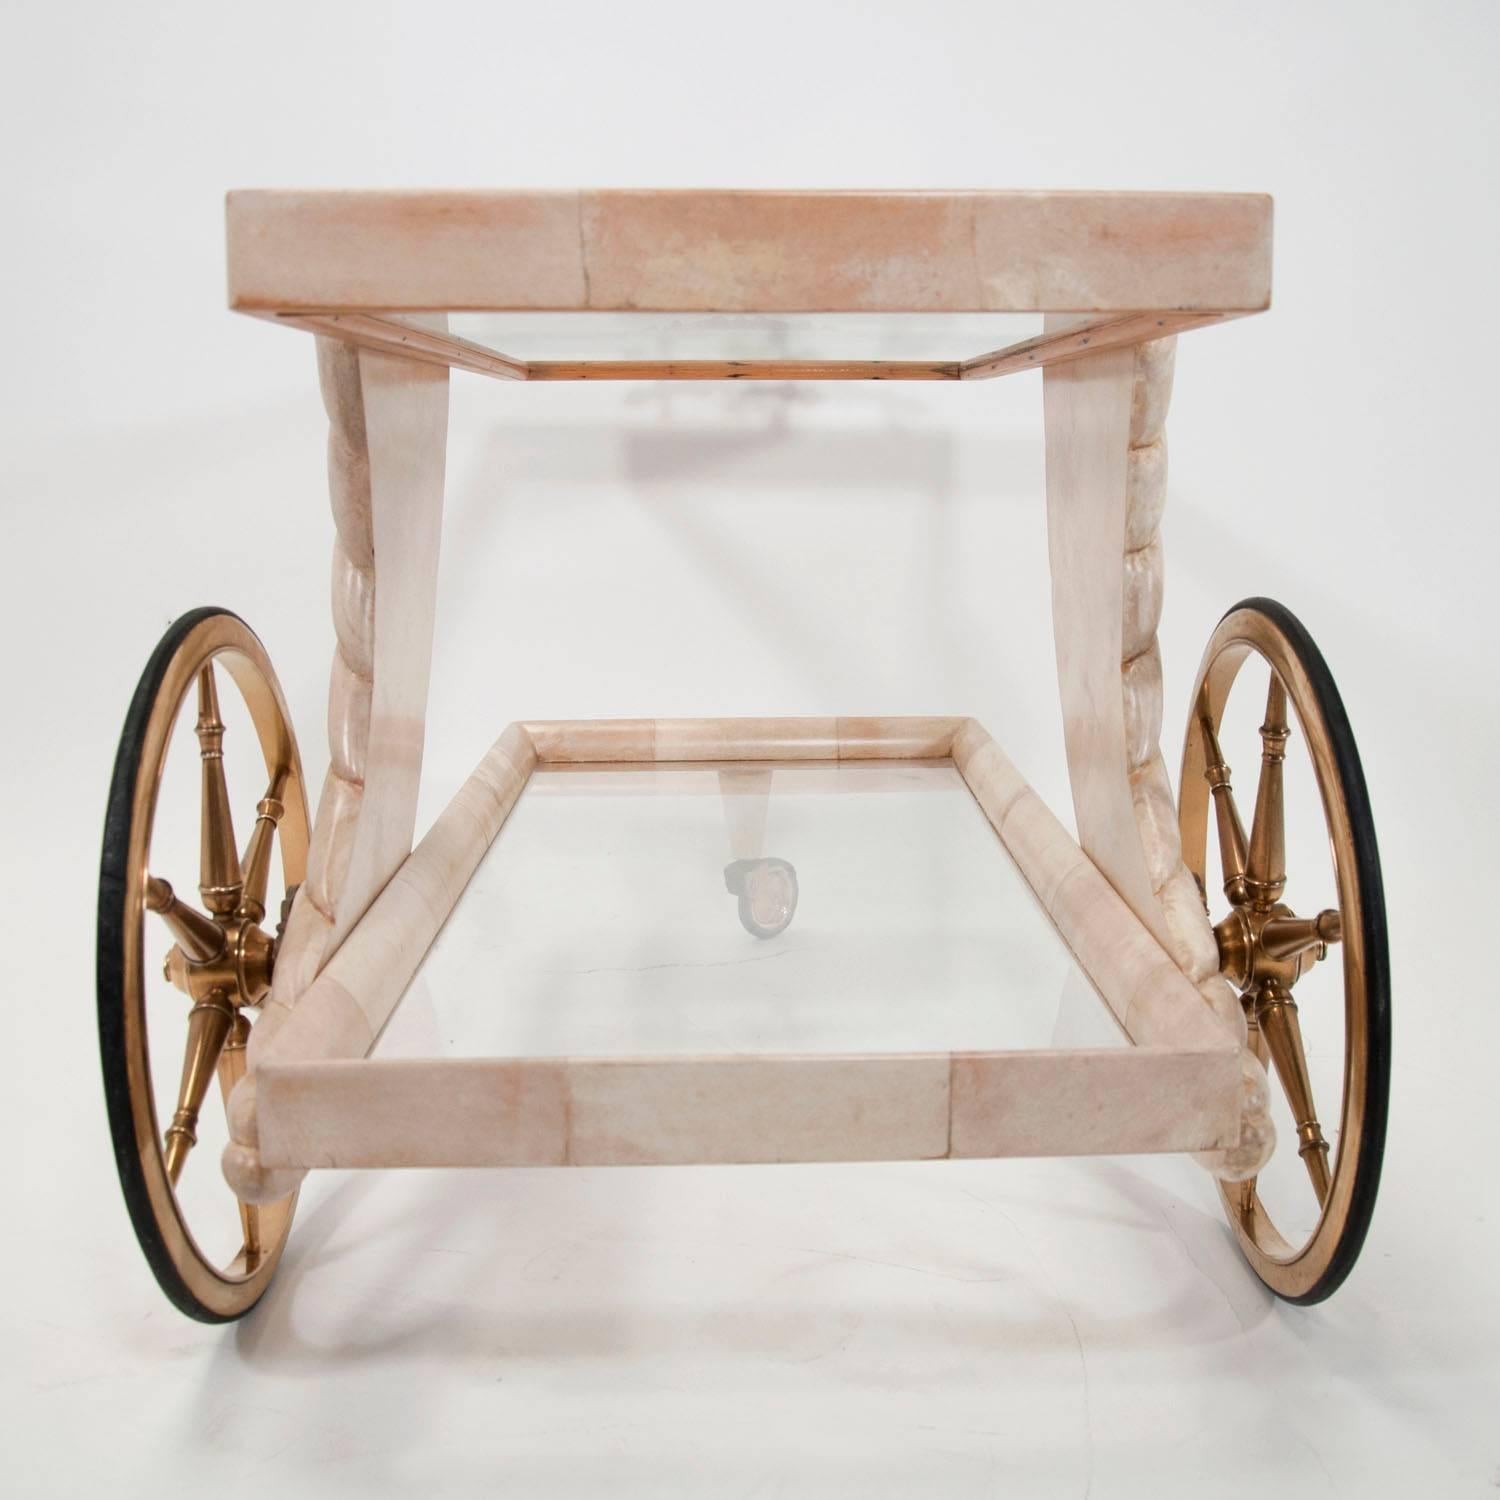 Aldo Tura Parchment Bar Cart with Brass Cornucopia In Good Condition For Sale In Palm Springs, CA